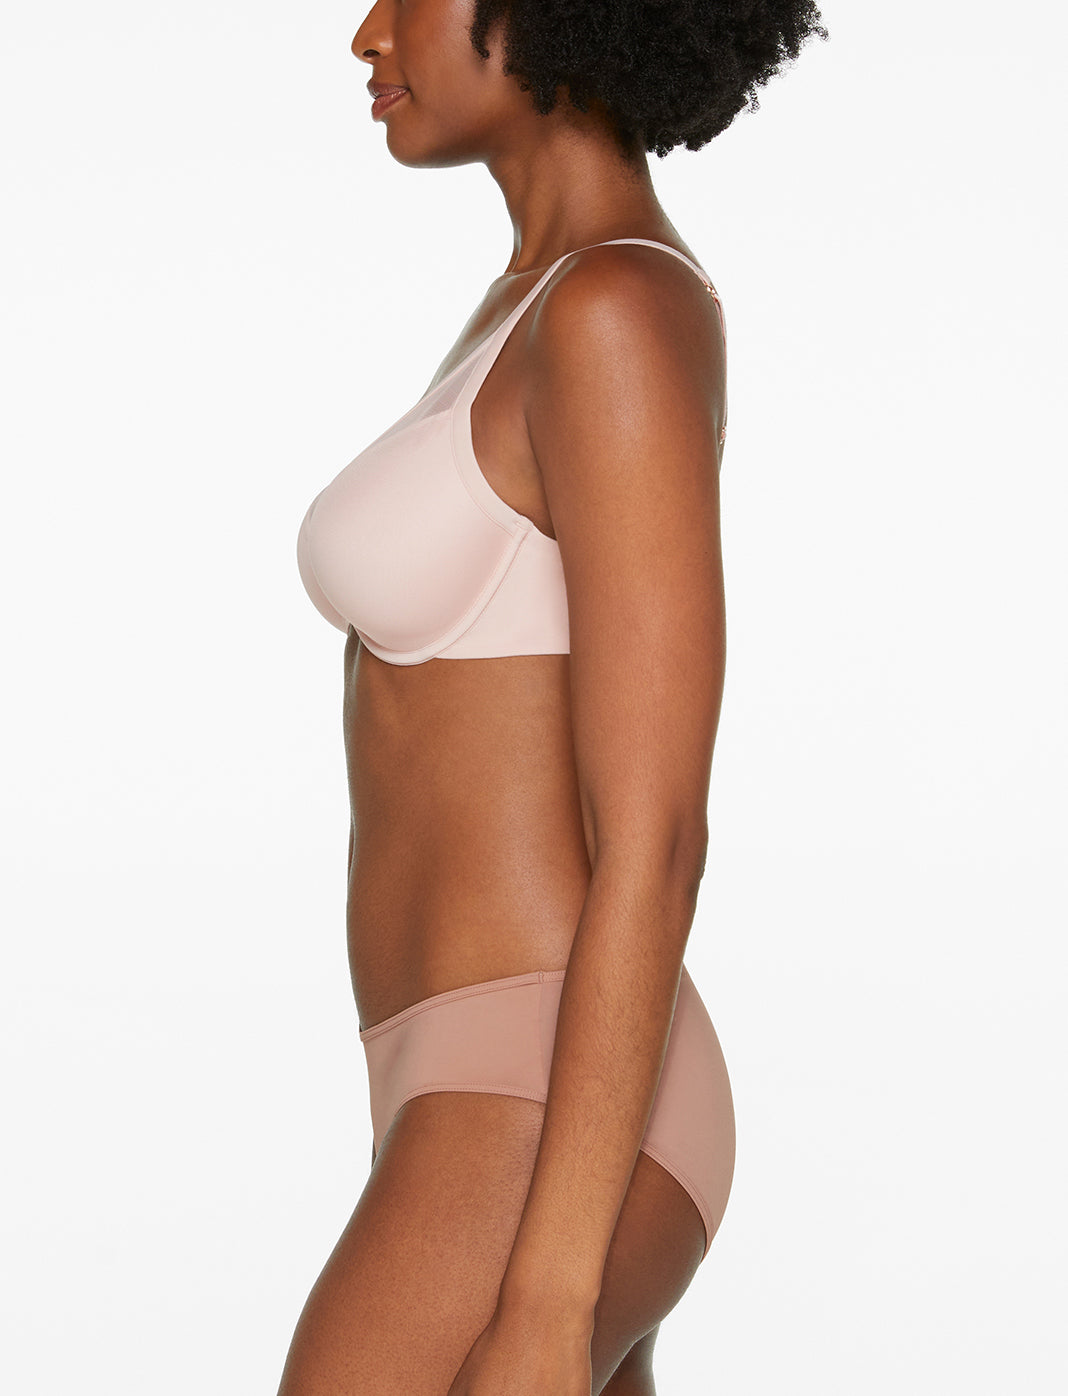 ThirdLove - Our Unlined Plunge Bra feels so comfortable, it really